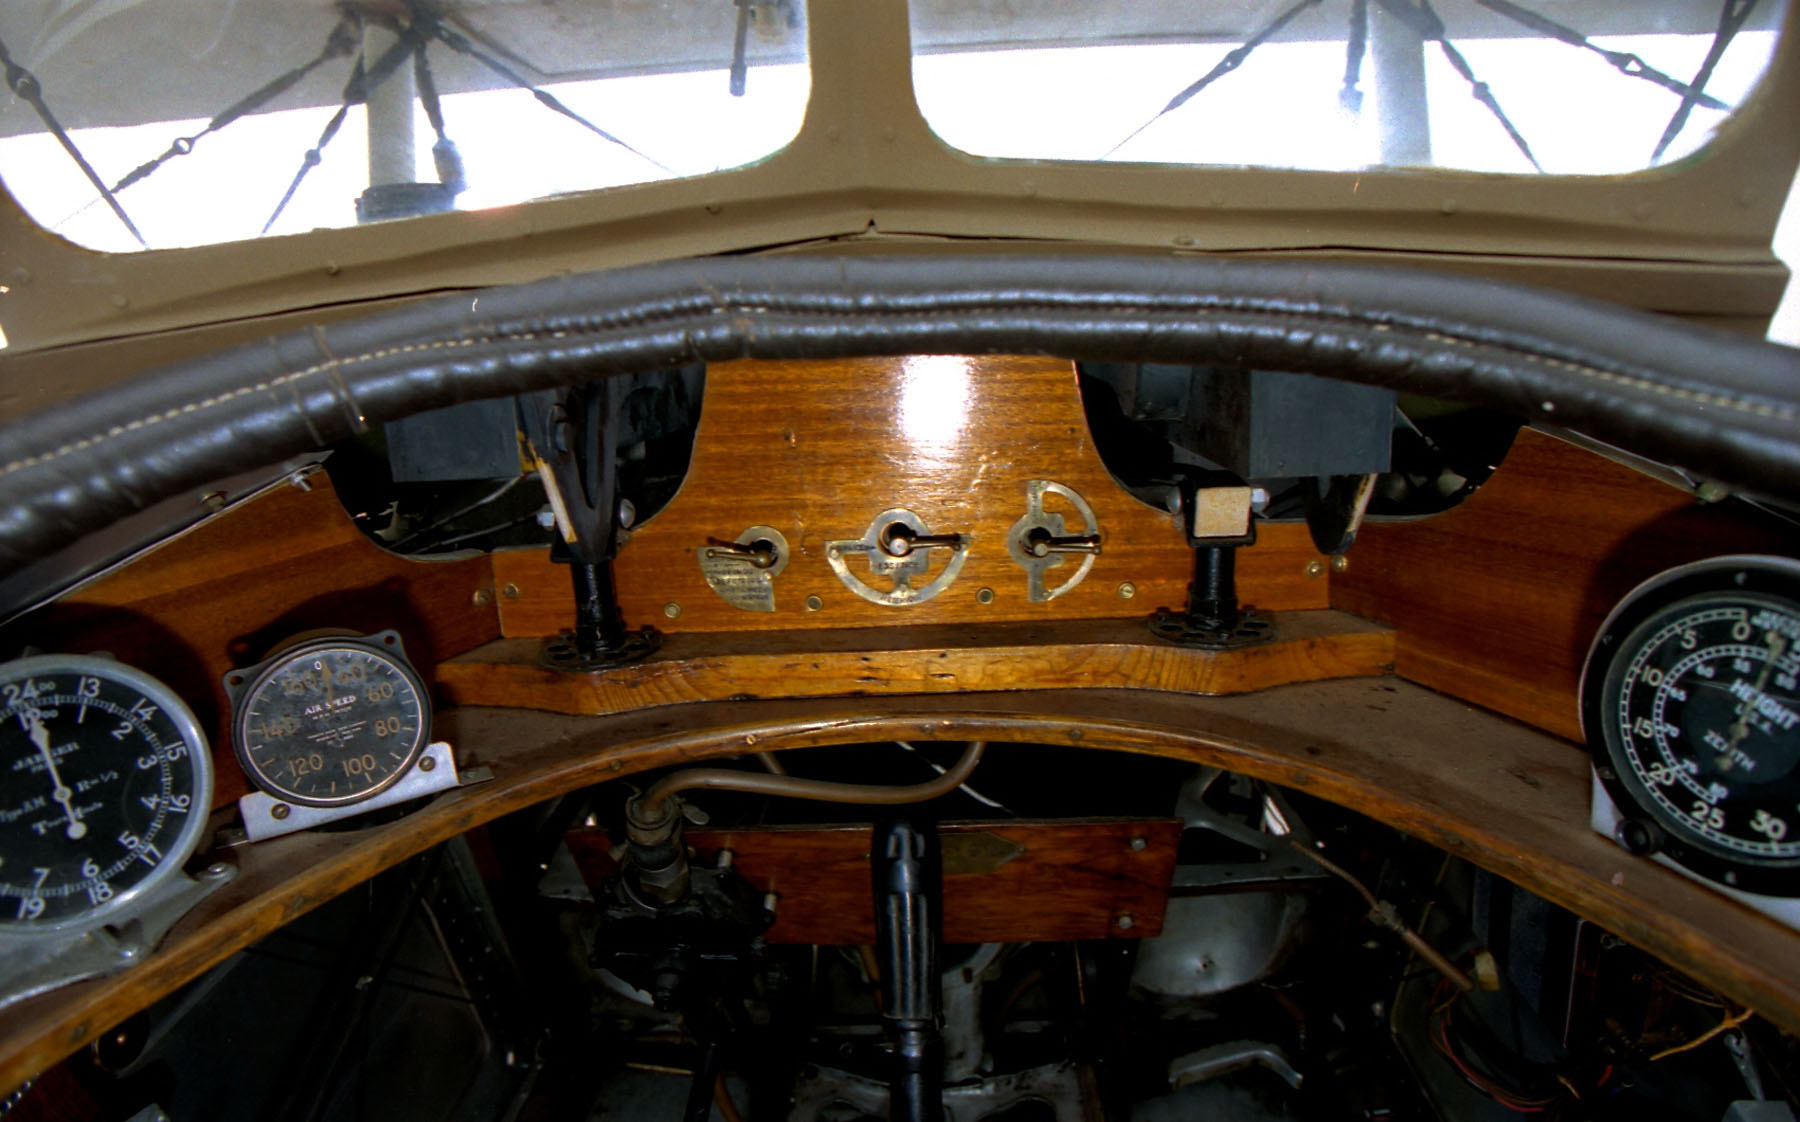 Instrument panel of SPAD S.XIII C.1 16439 at NMUSAF. (U.S. Air Force)